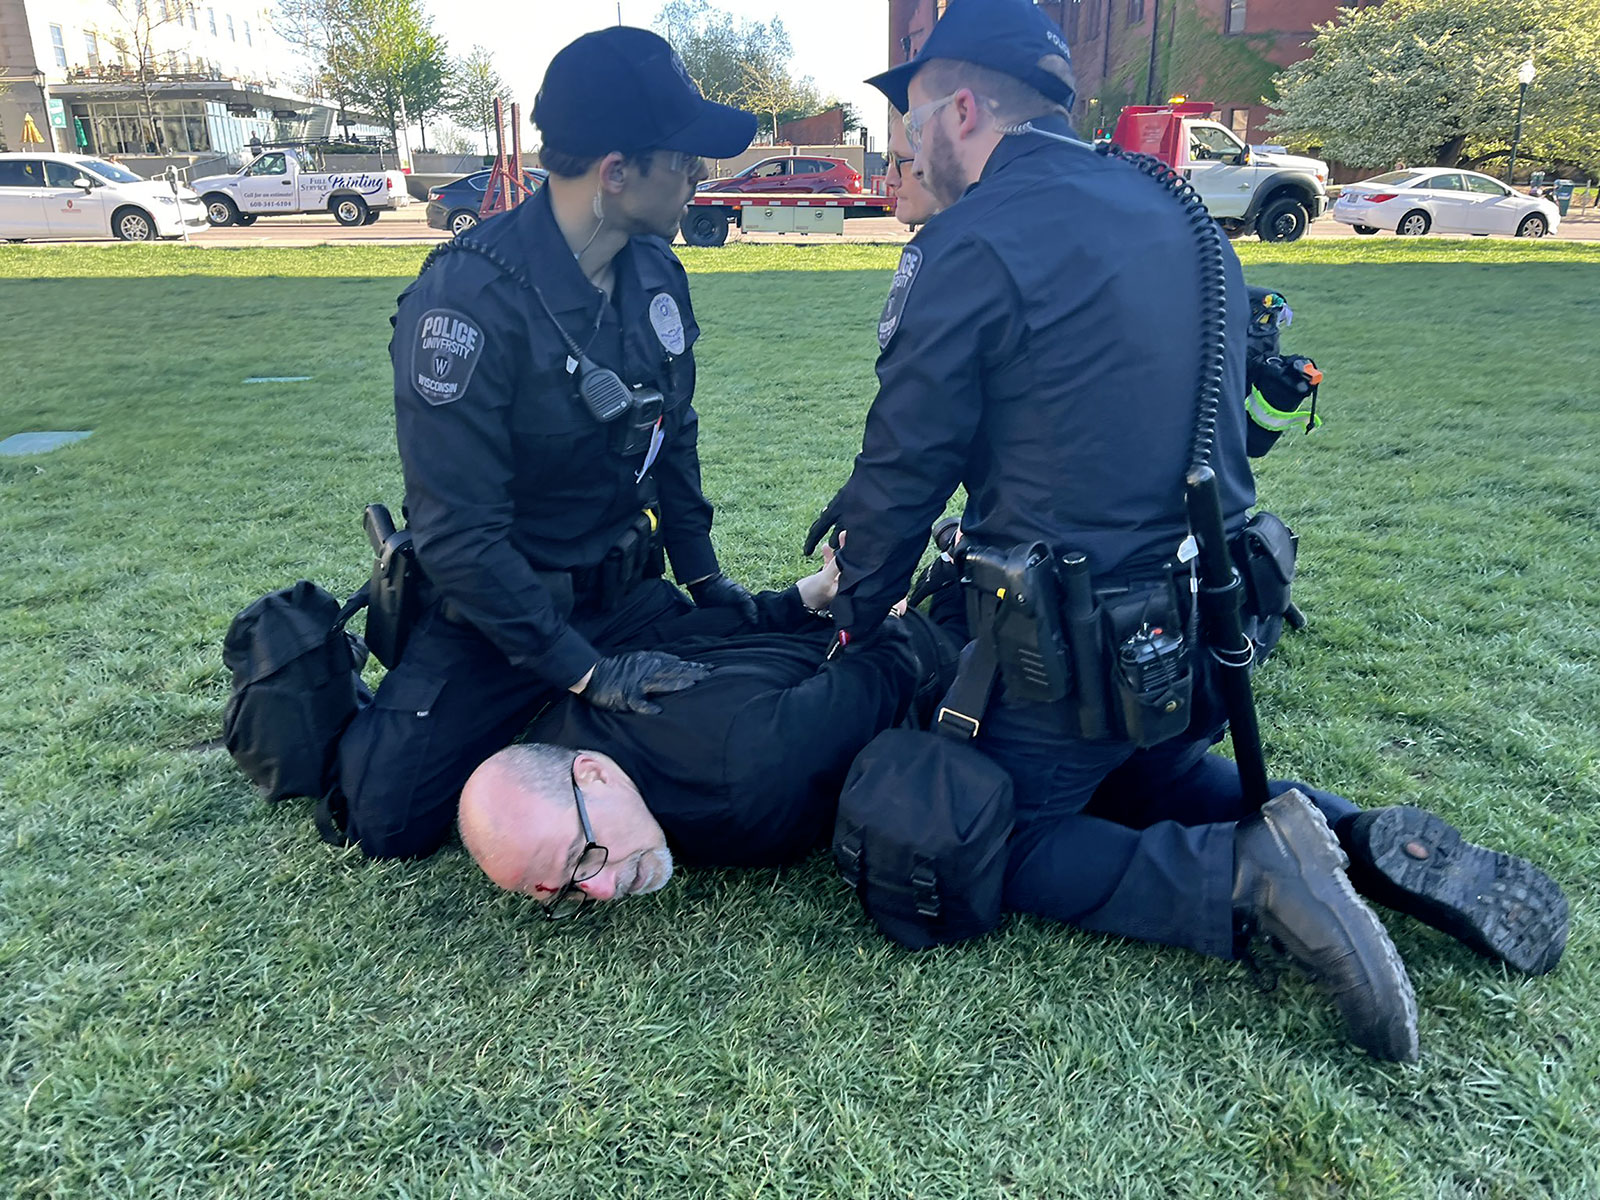 Associate Professor of Community & Environmental Sociology Samer Alatout is seen being held to the ground by University of Wisconsin-Madison Police officers on Wednesday, May 1.